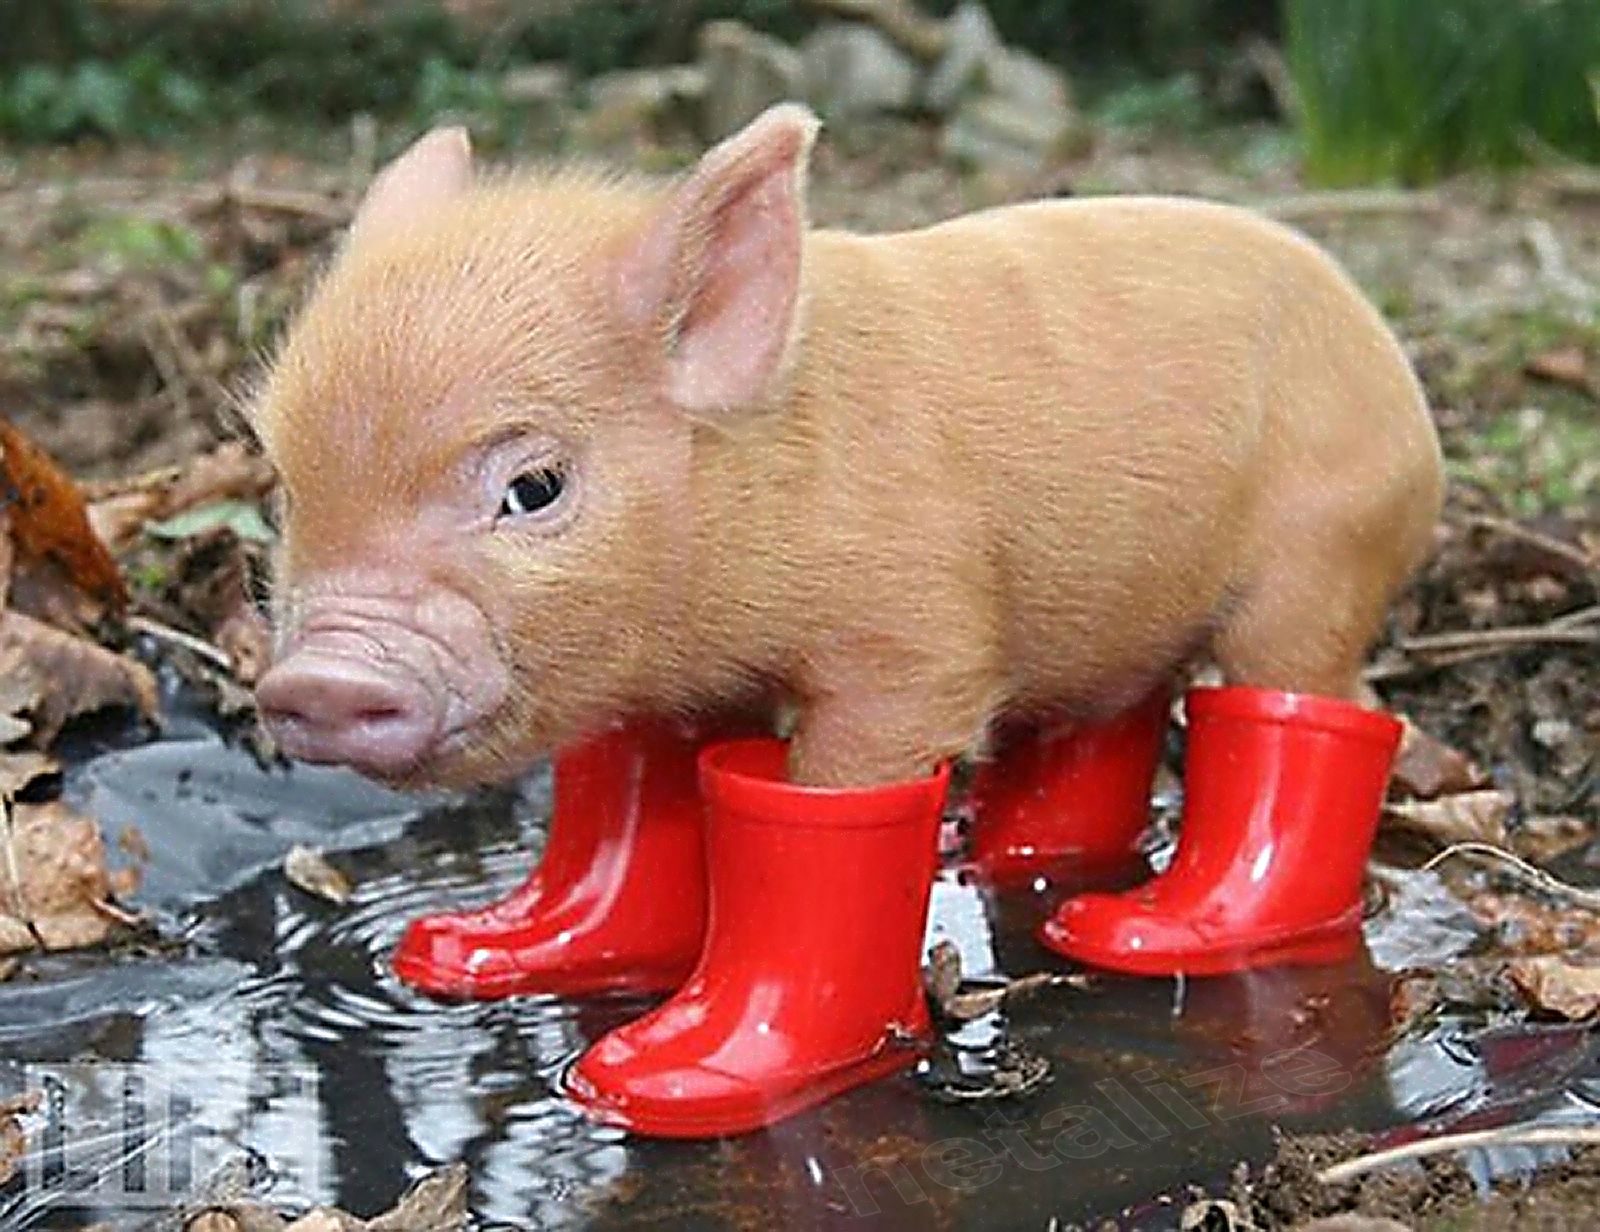 little baby pig piglet red boots large wallpaper   Imgur